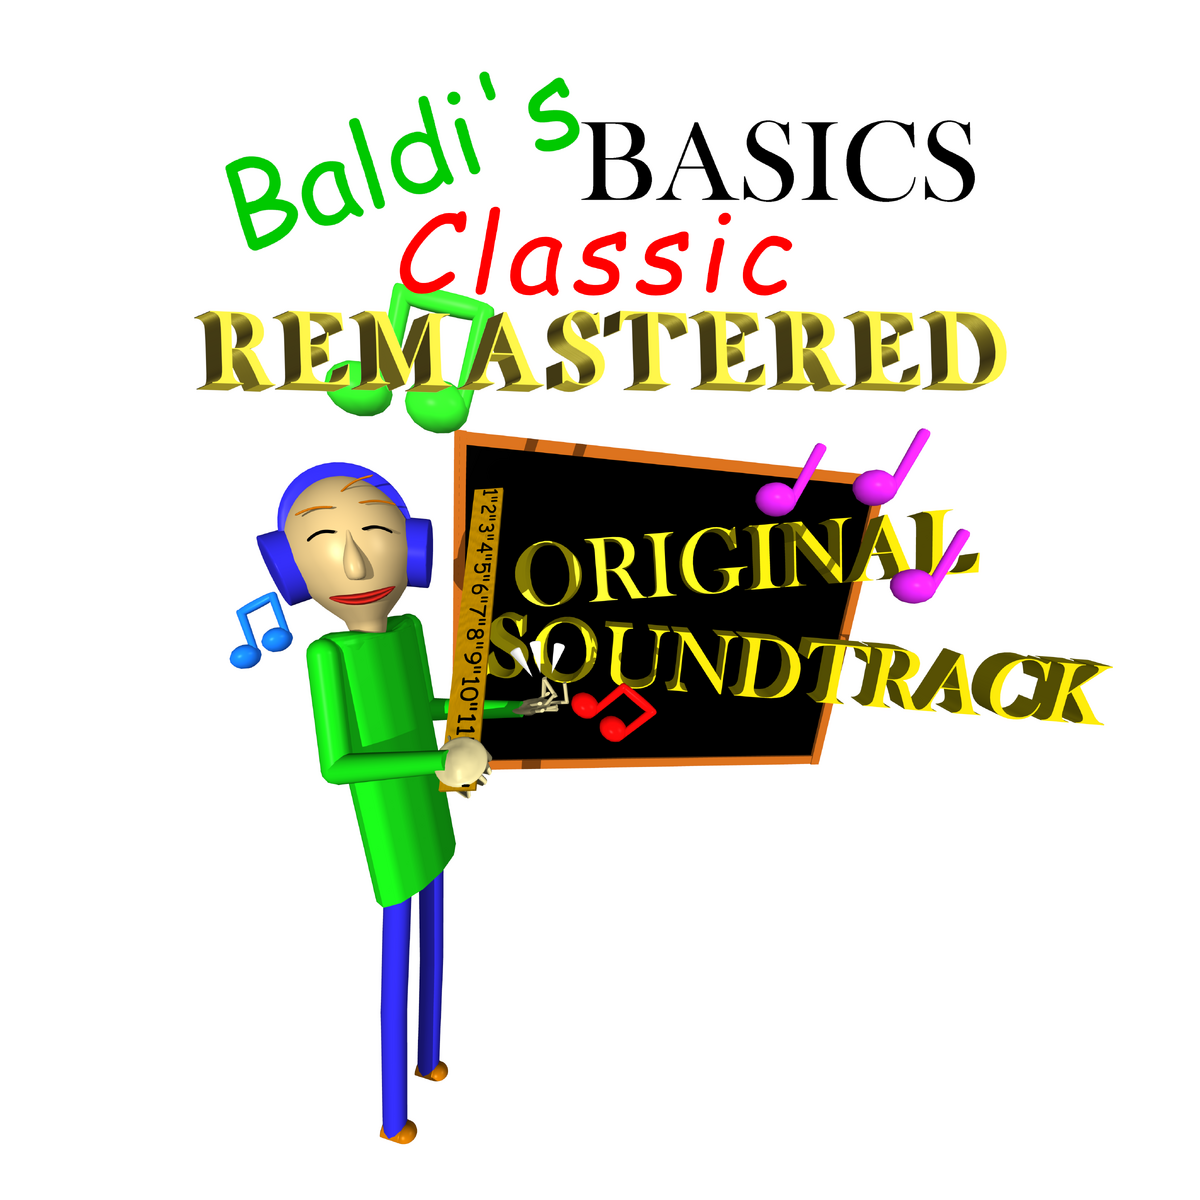 PC / Computer - Baldi's Basics in Education and Learning - School